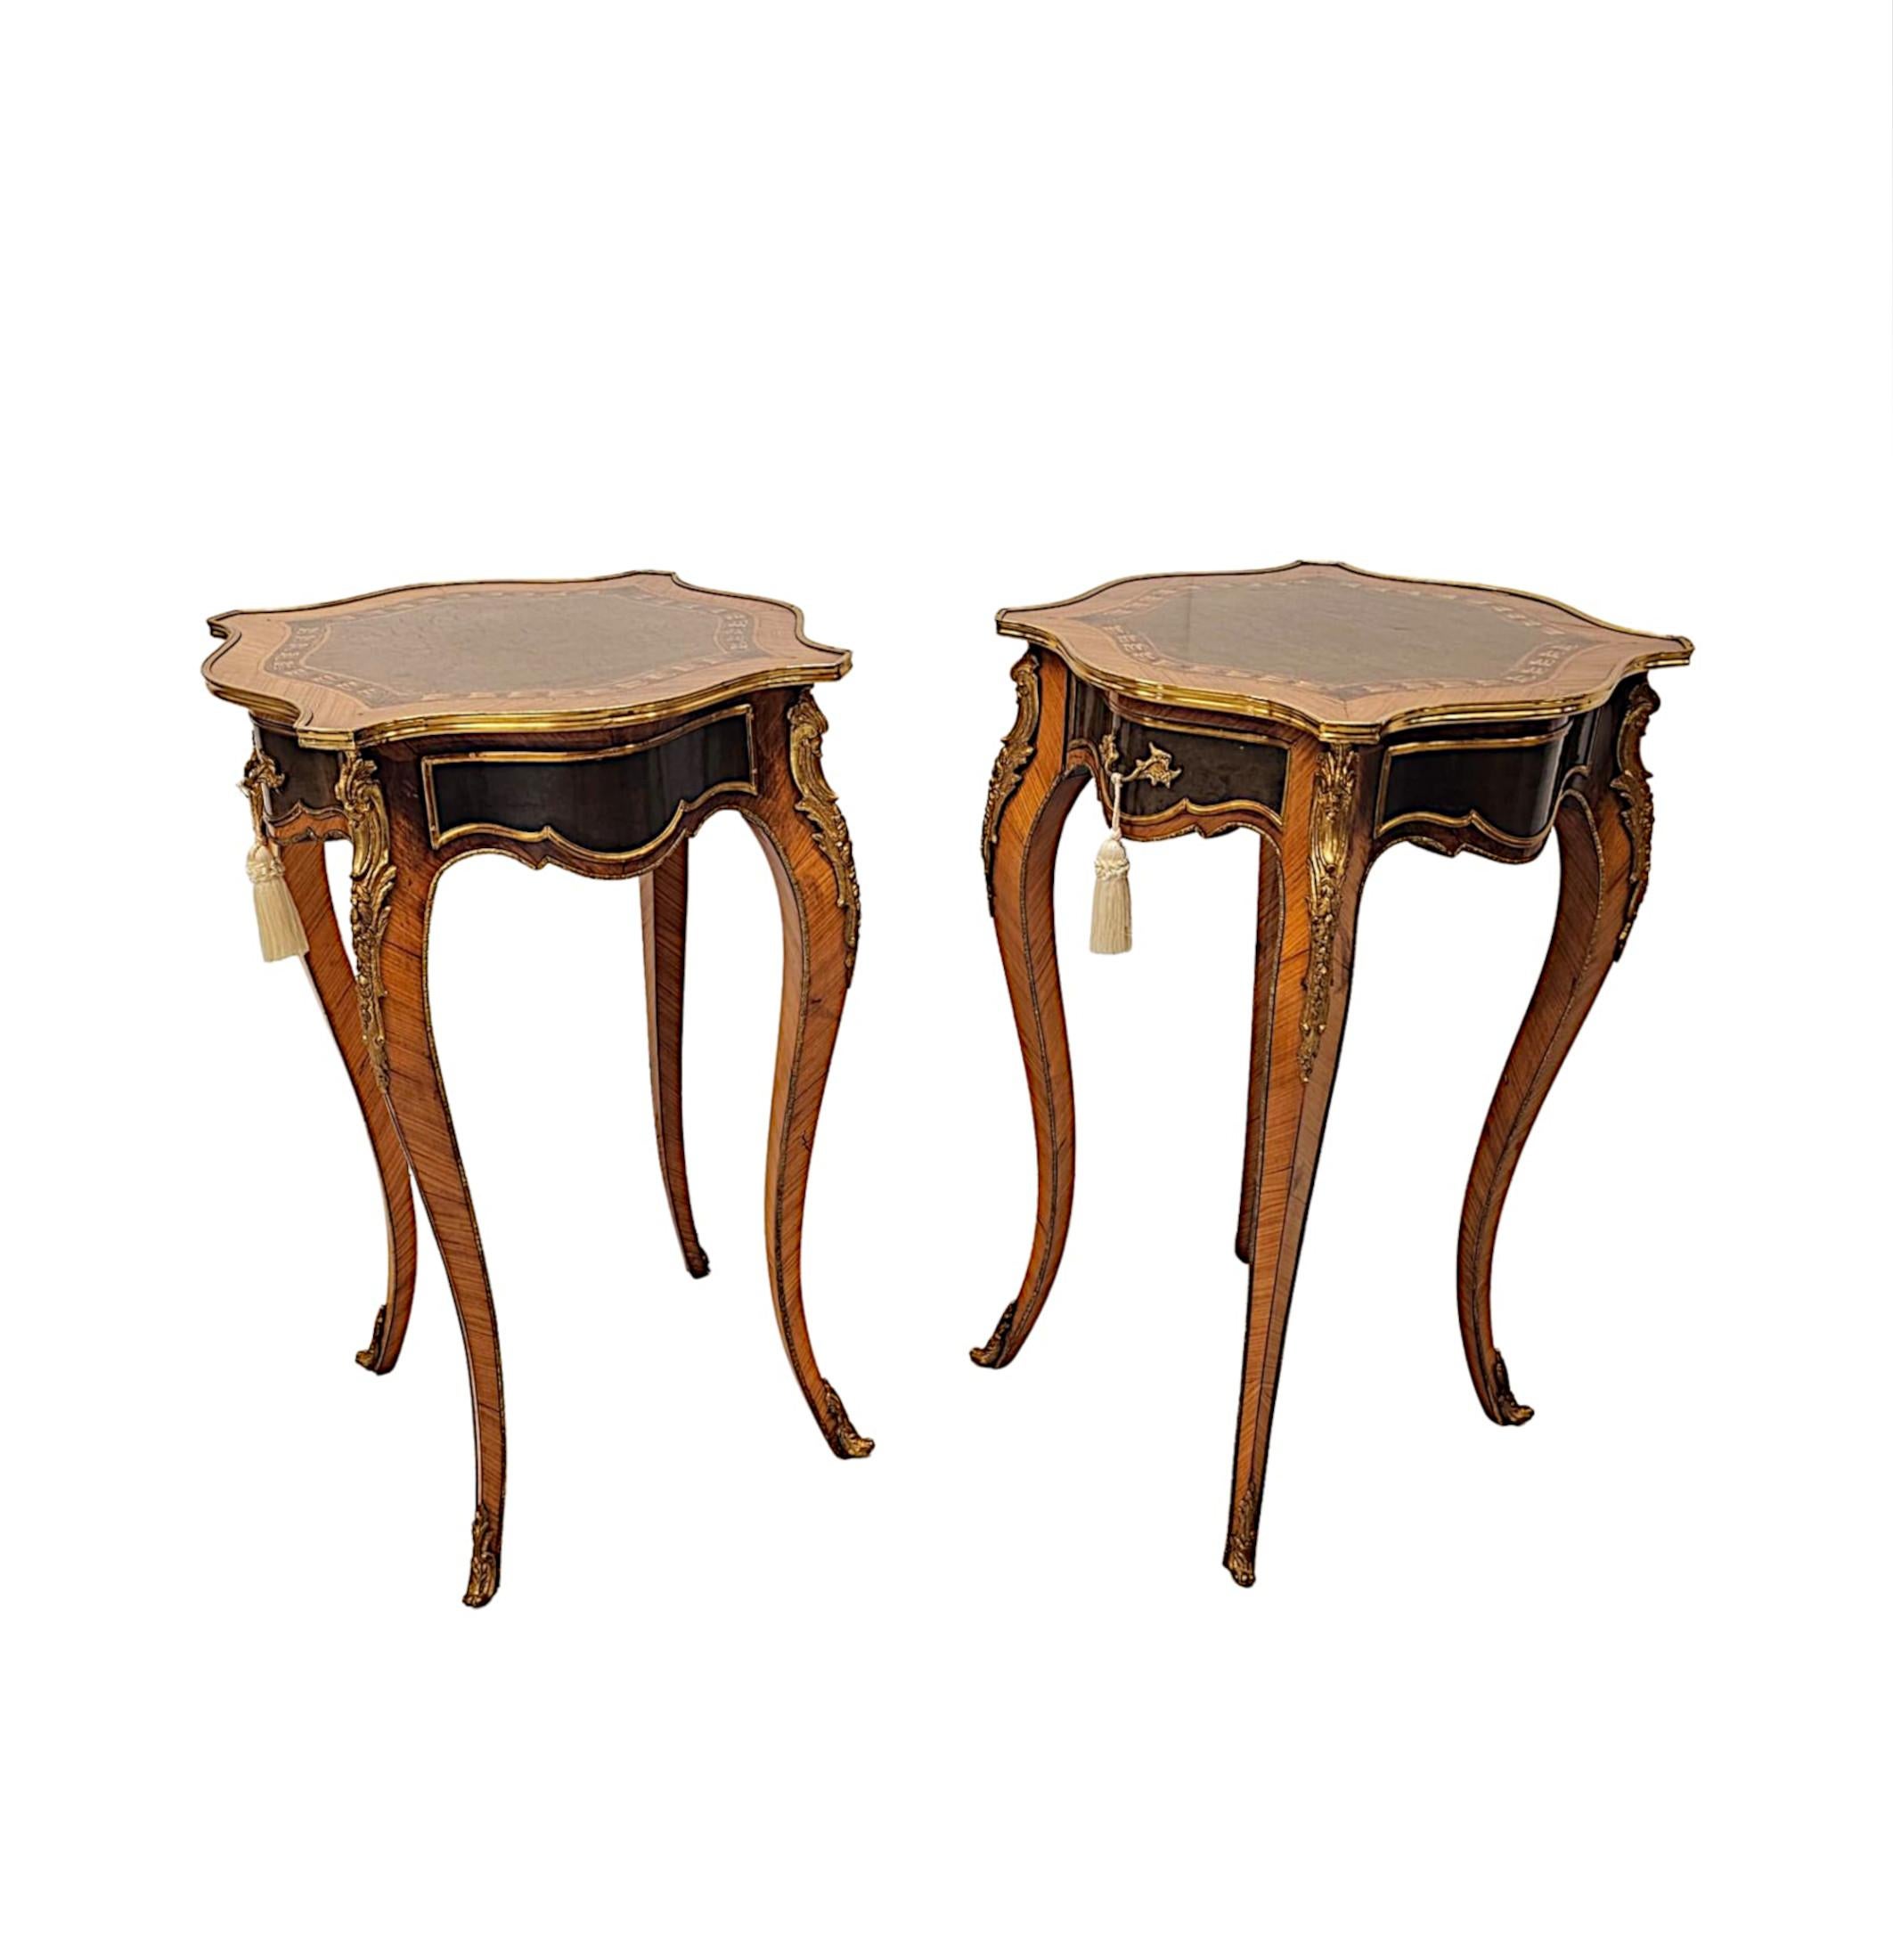 A stunning pair of 20th Century of richly patinated fruitwood side tables of exceptional quality.  This fabulous pair are finely carved with delicate line inlay, highly inlaid marquetry panel detail and finely cast ormolu mounts throughout.  The